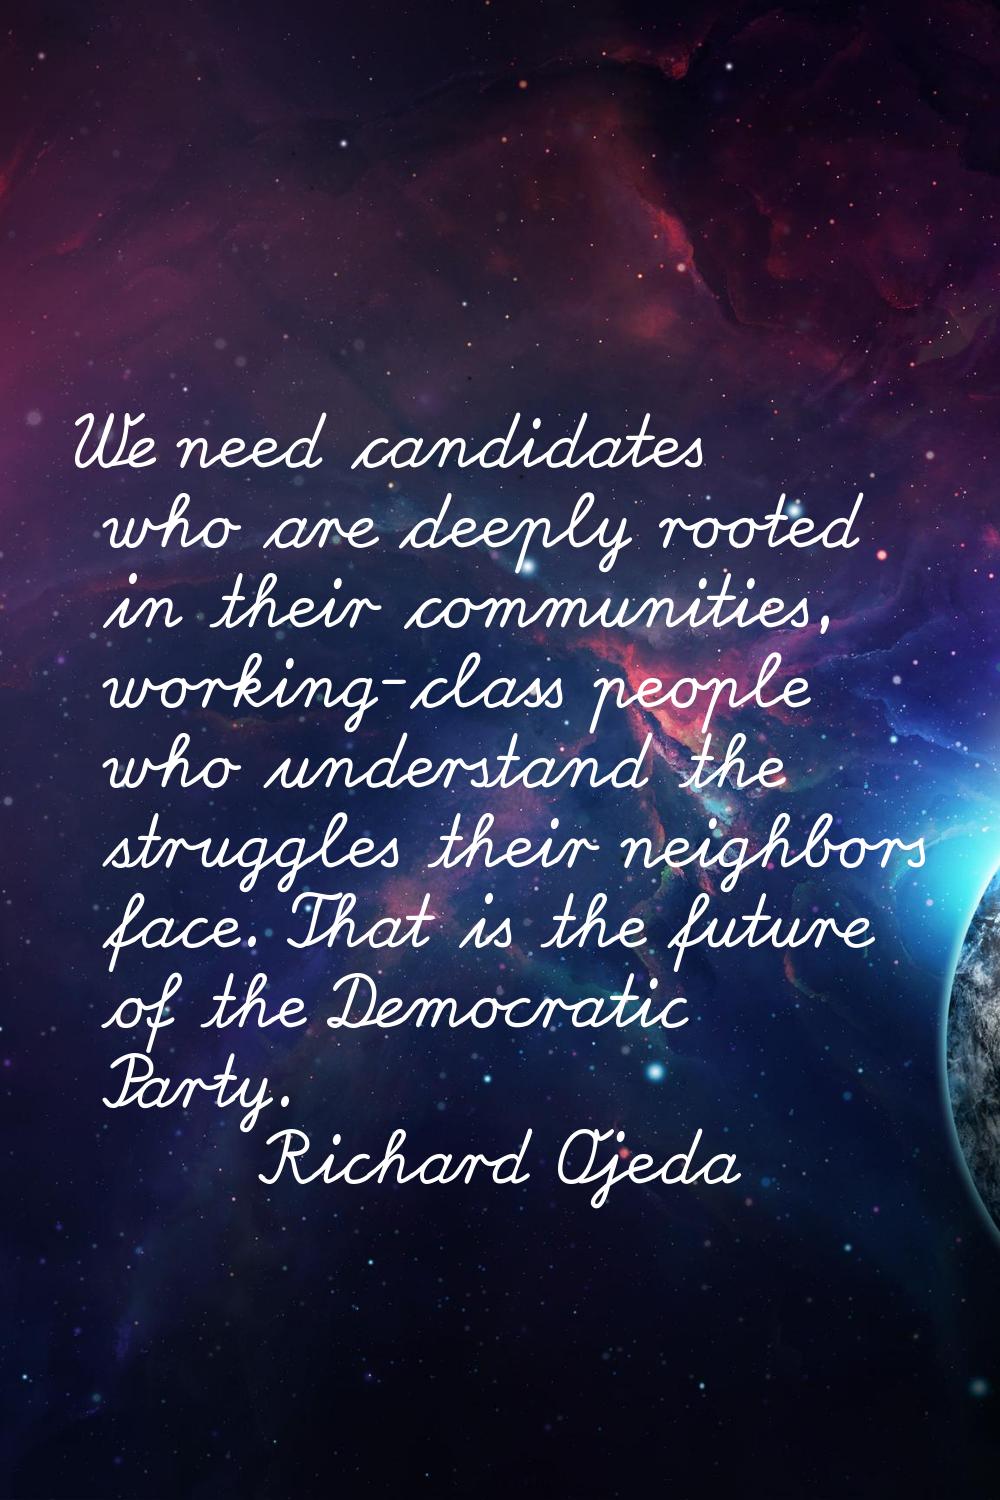 We need candidates who are deeply rooted in their communities, working-class people who understand 